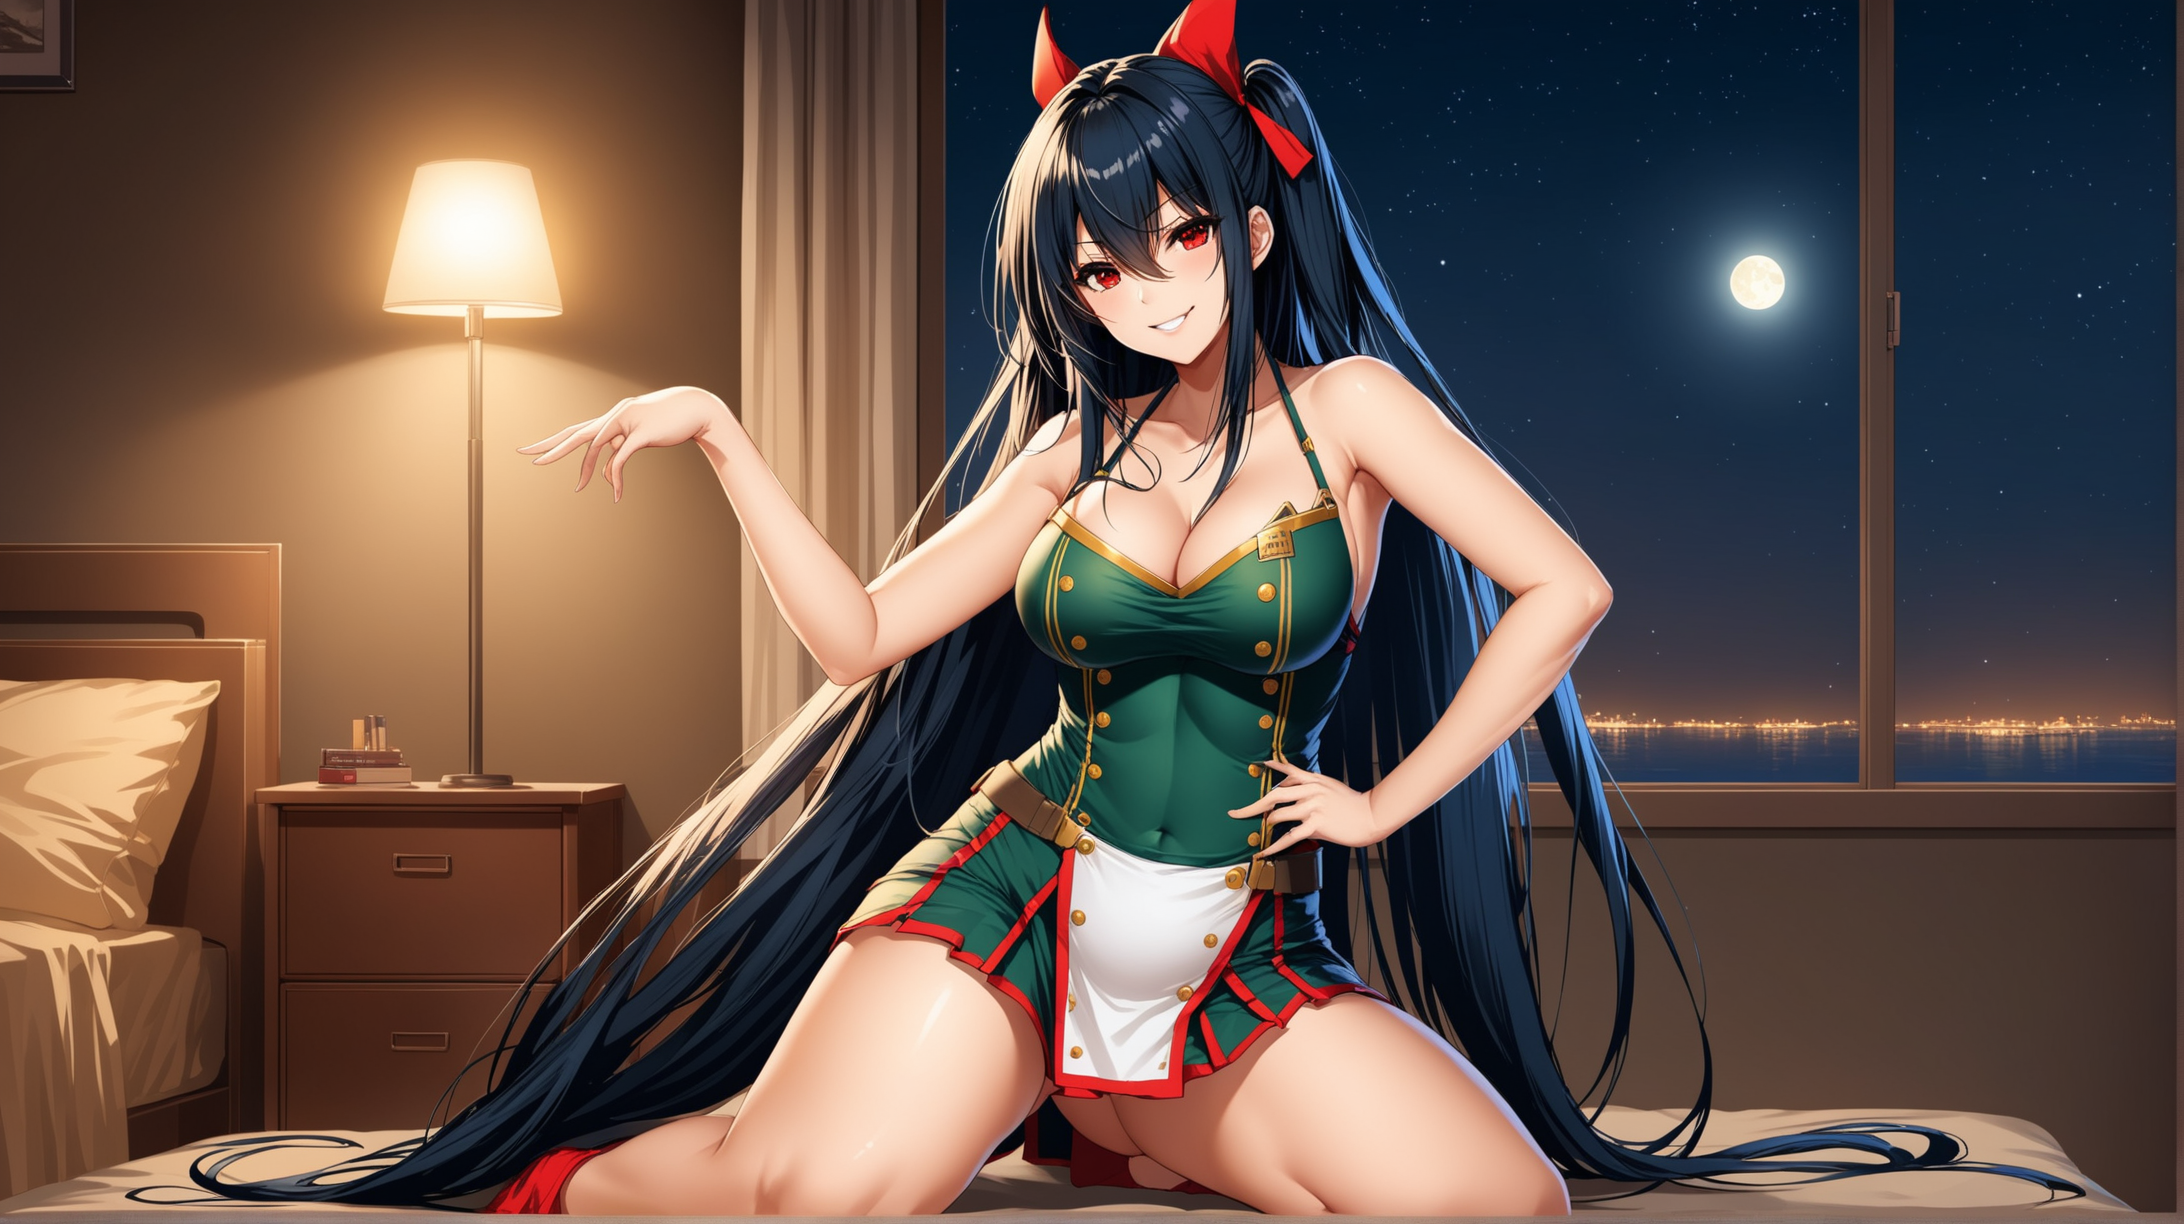 Draw the character Taihou from Azur Lane, long hair, red eyes, high quality, indoors, at night, in a nonchalant pose, wearing an outfit inspired from the Fallout series, smiling at the viewer